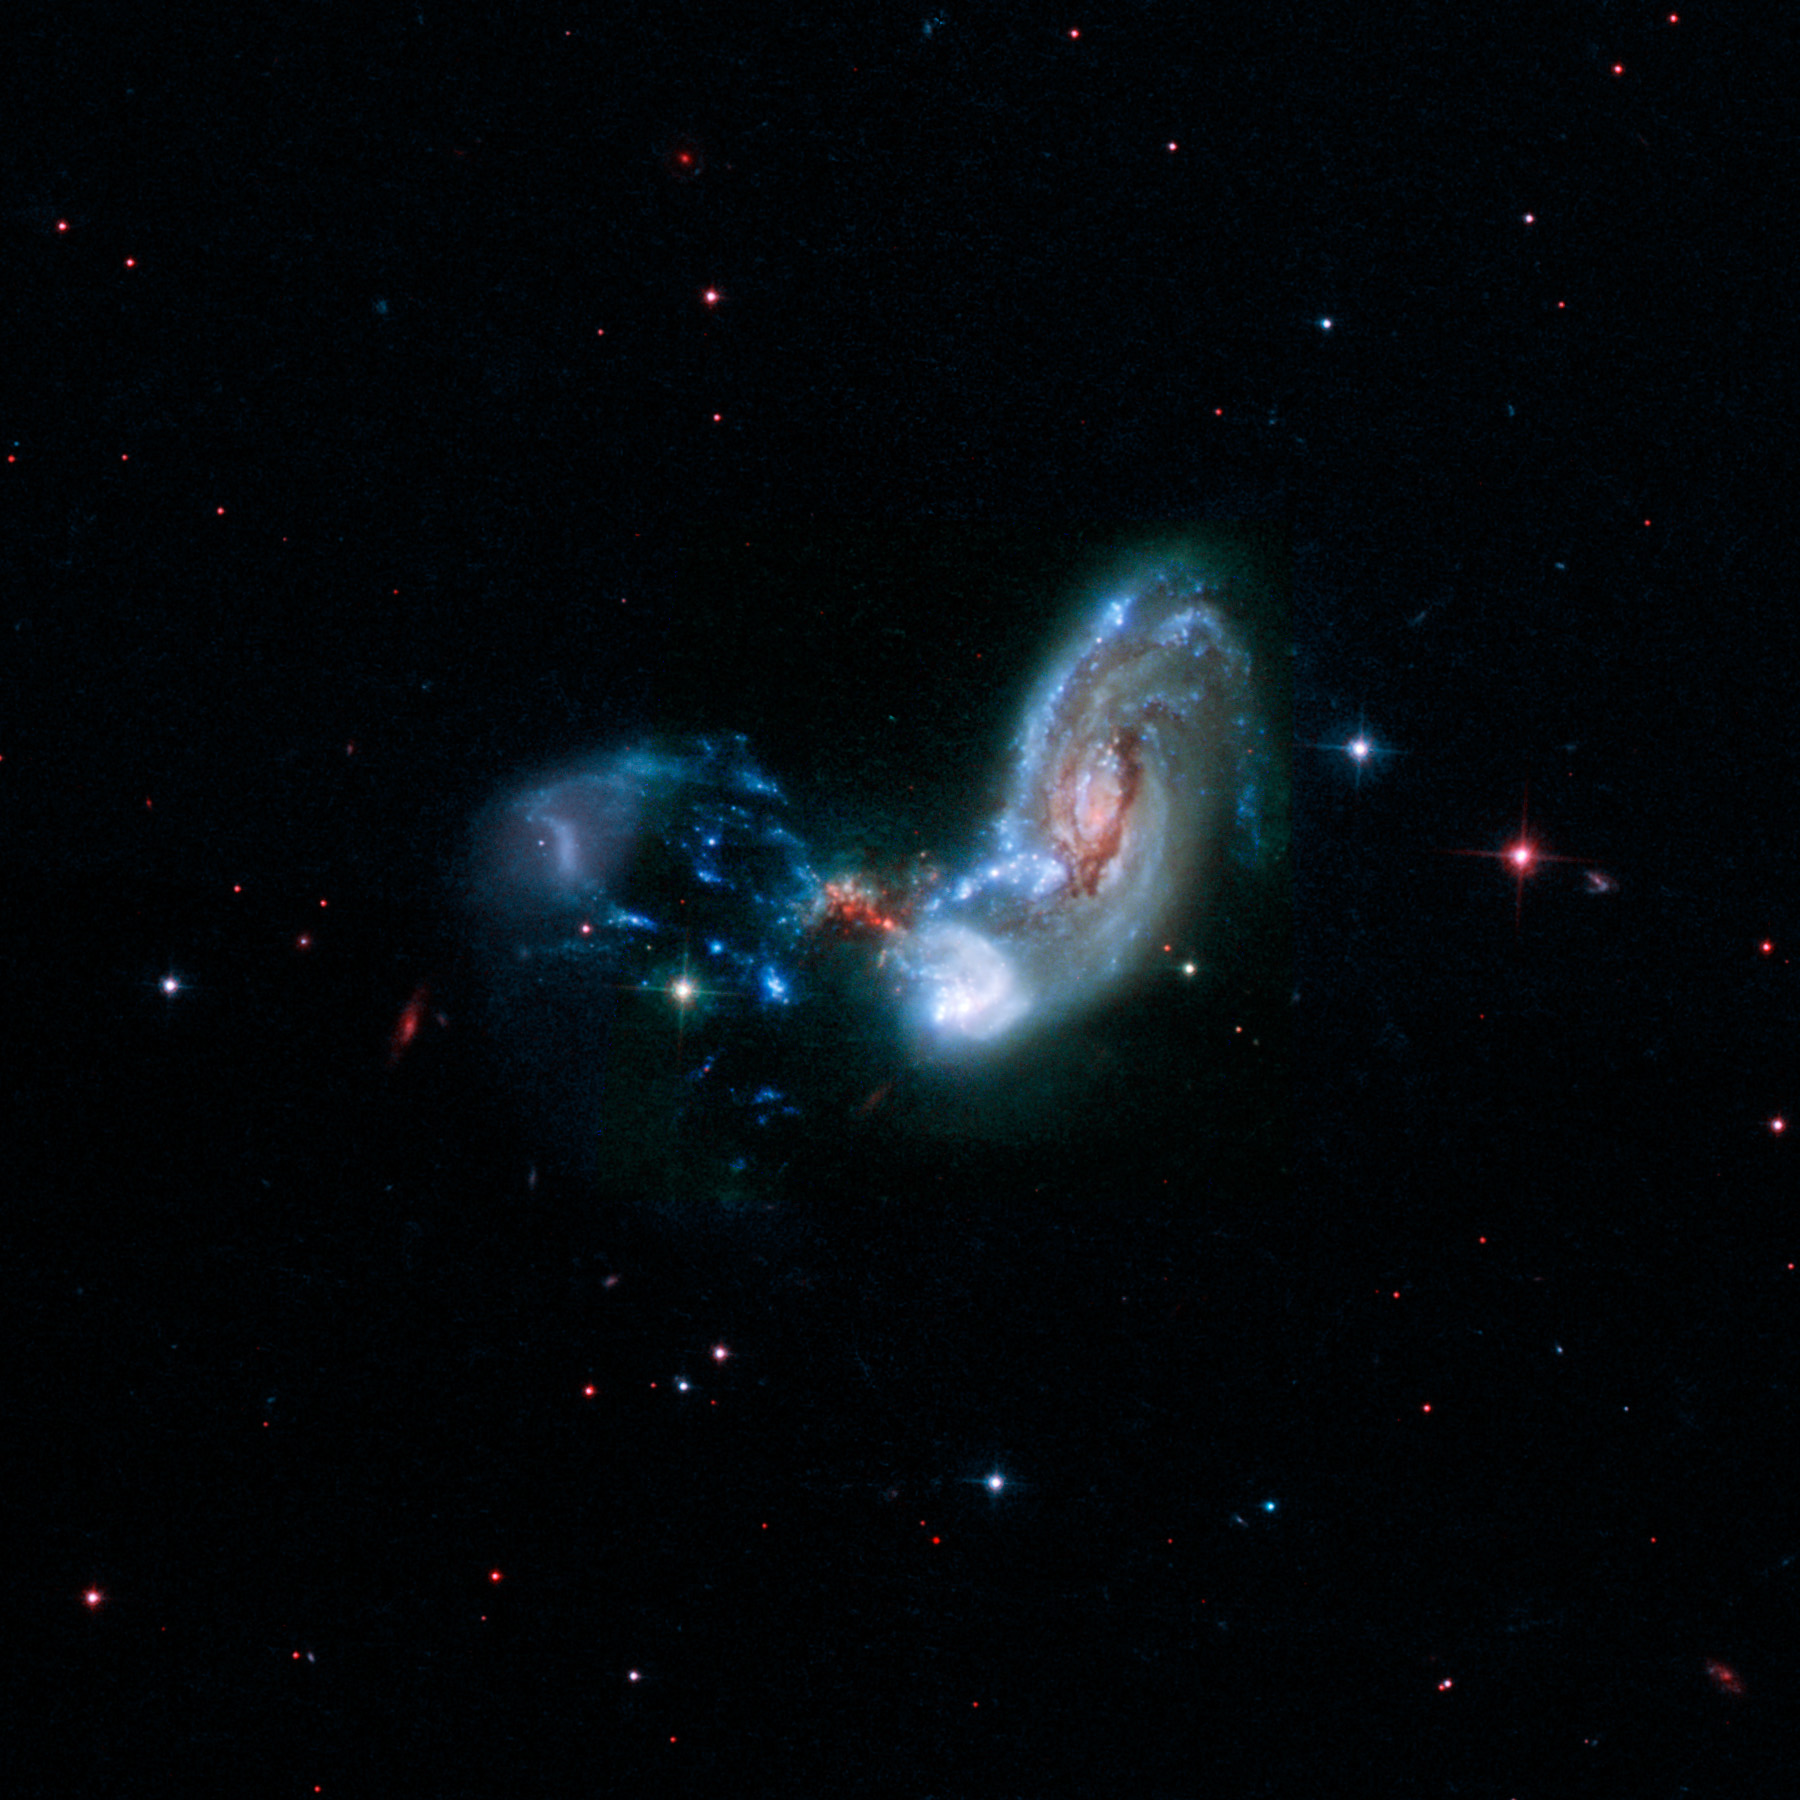 The image above combines near-infrared, visible, and far-ultraviolet observations from the Hubble Space Telescope.